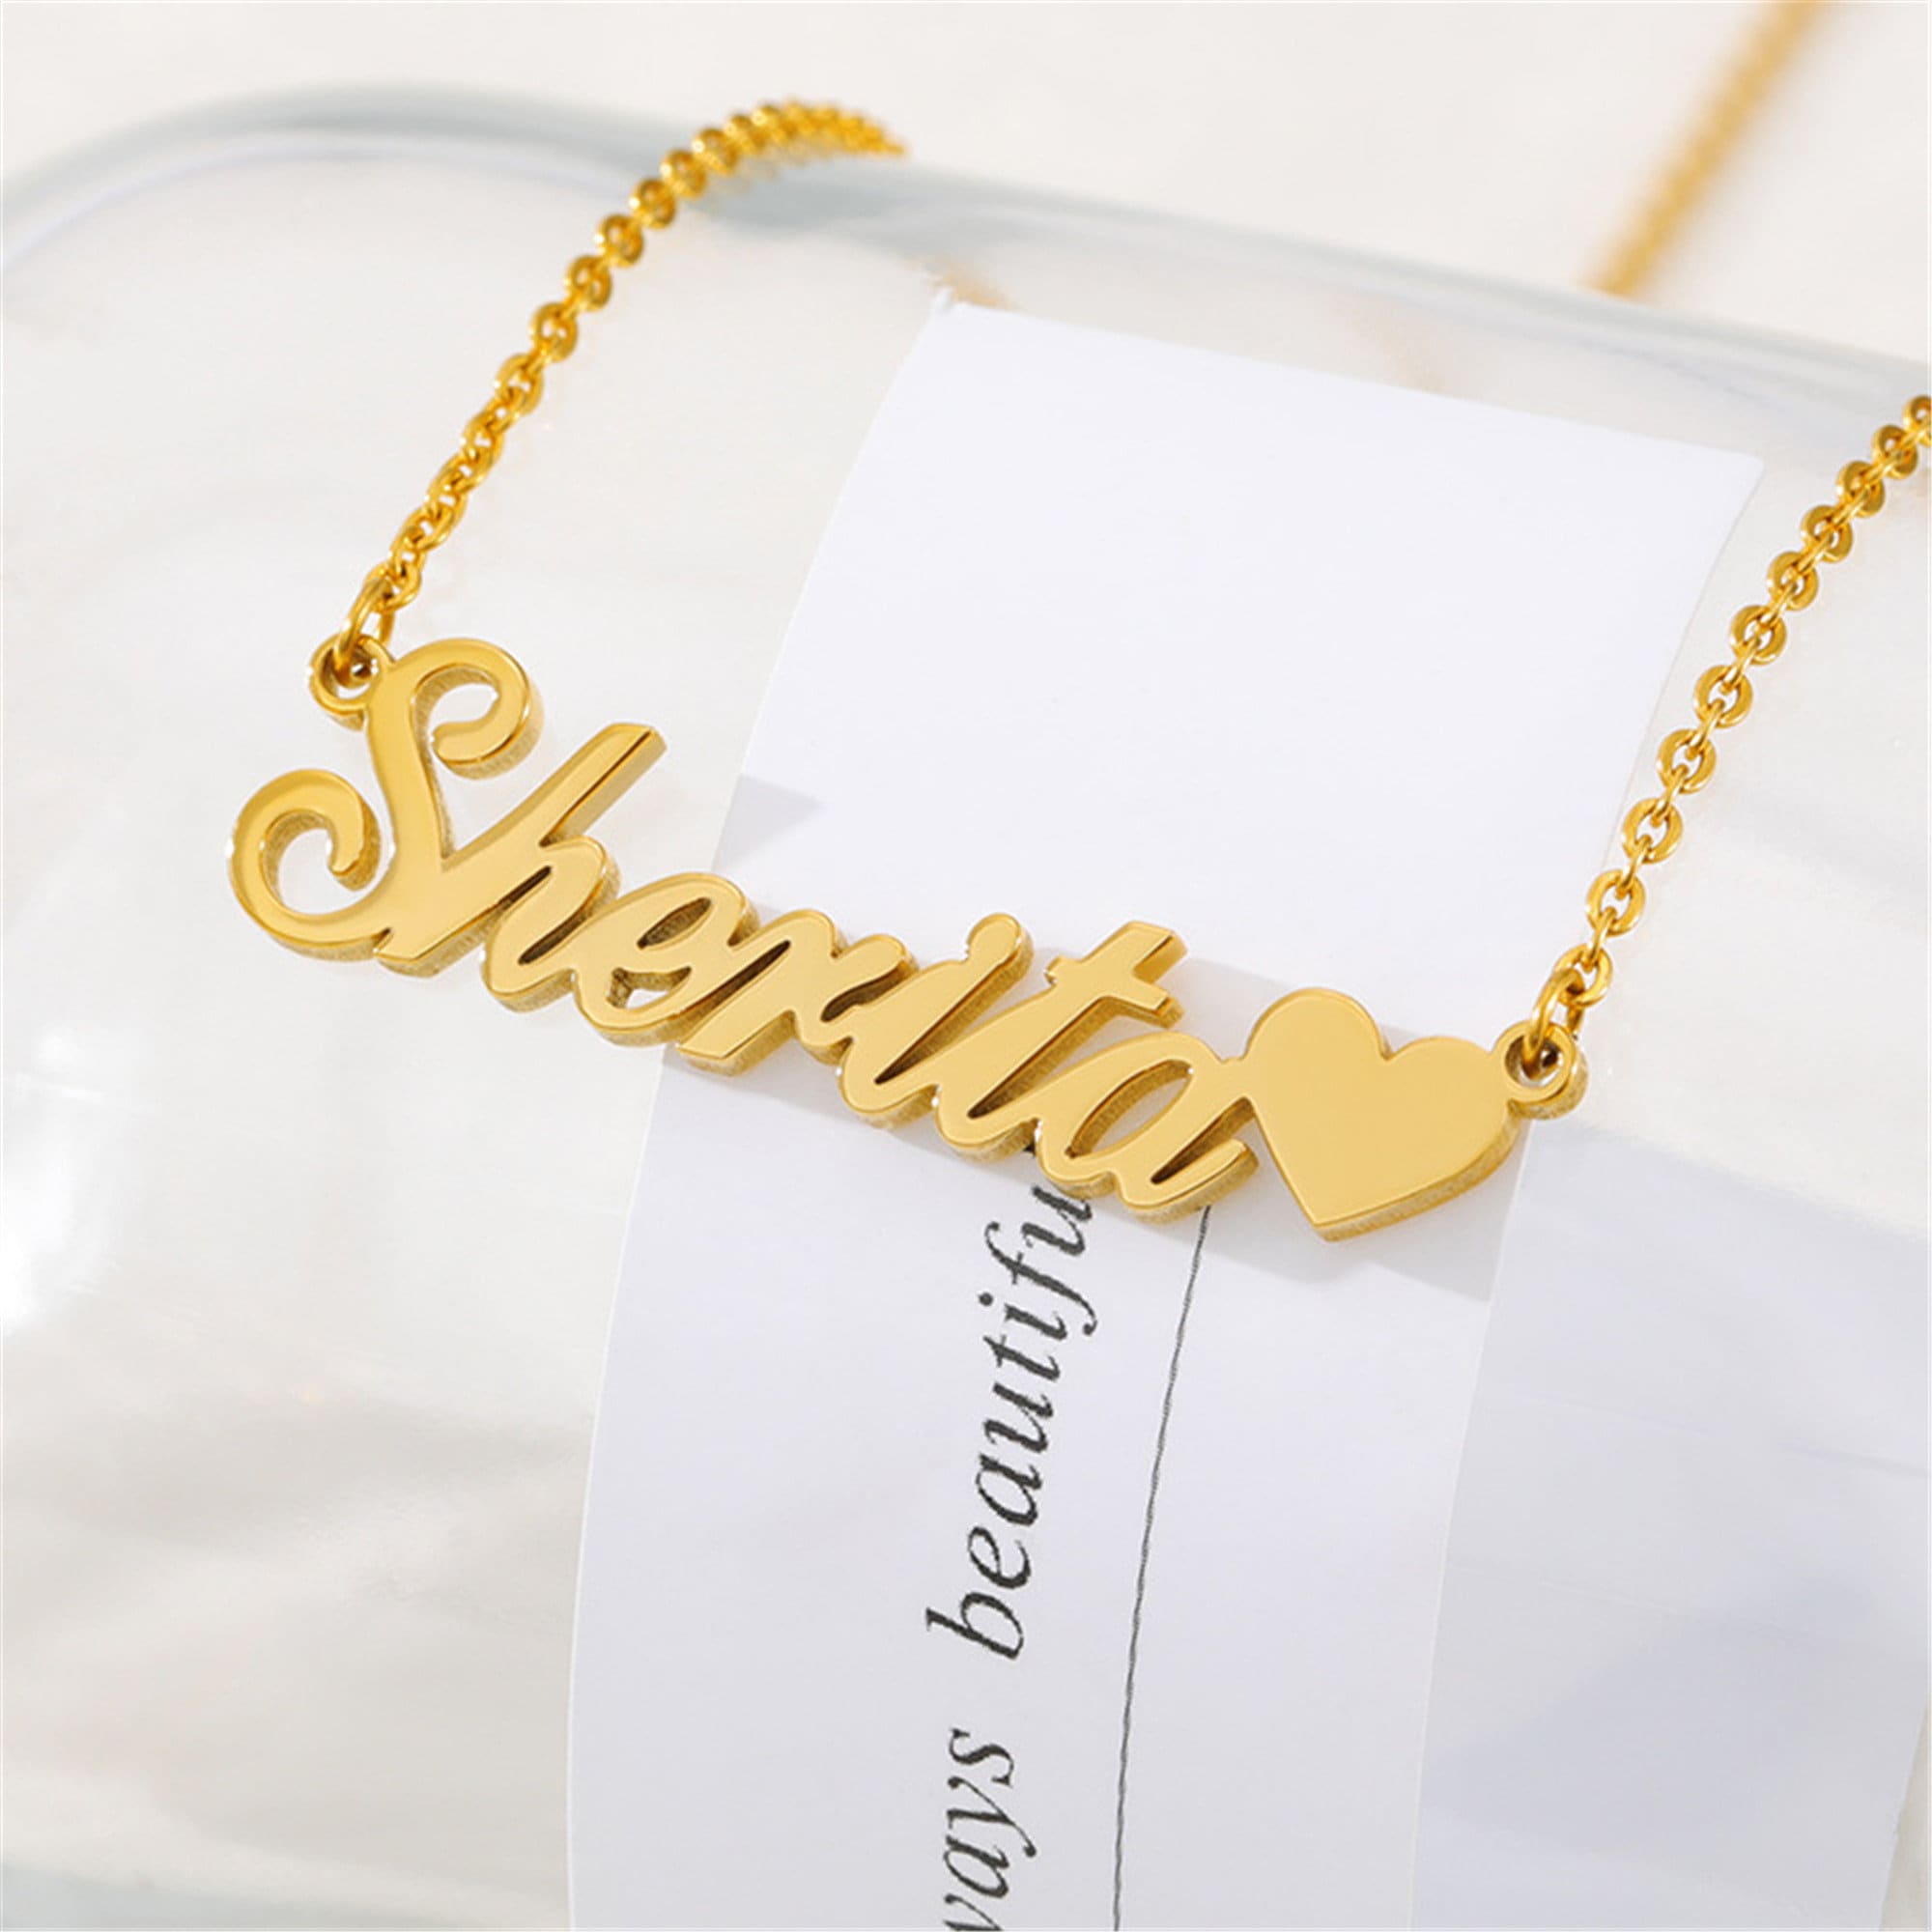 18k Gold Personalized Name Necklace Name Tag Necklace - Etsy